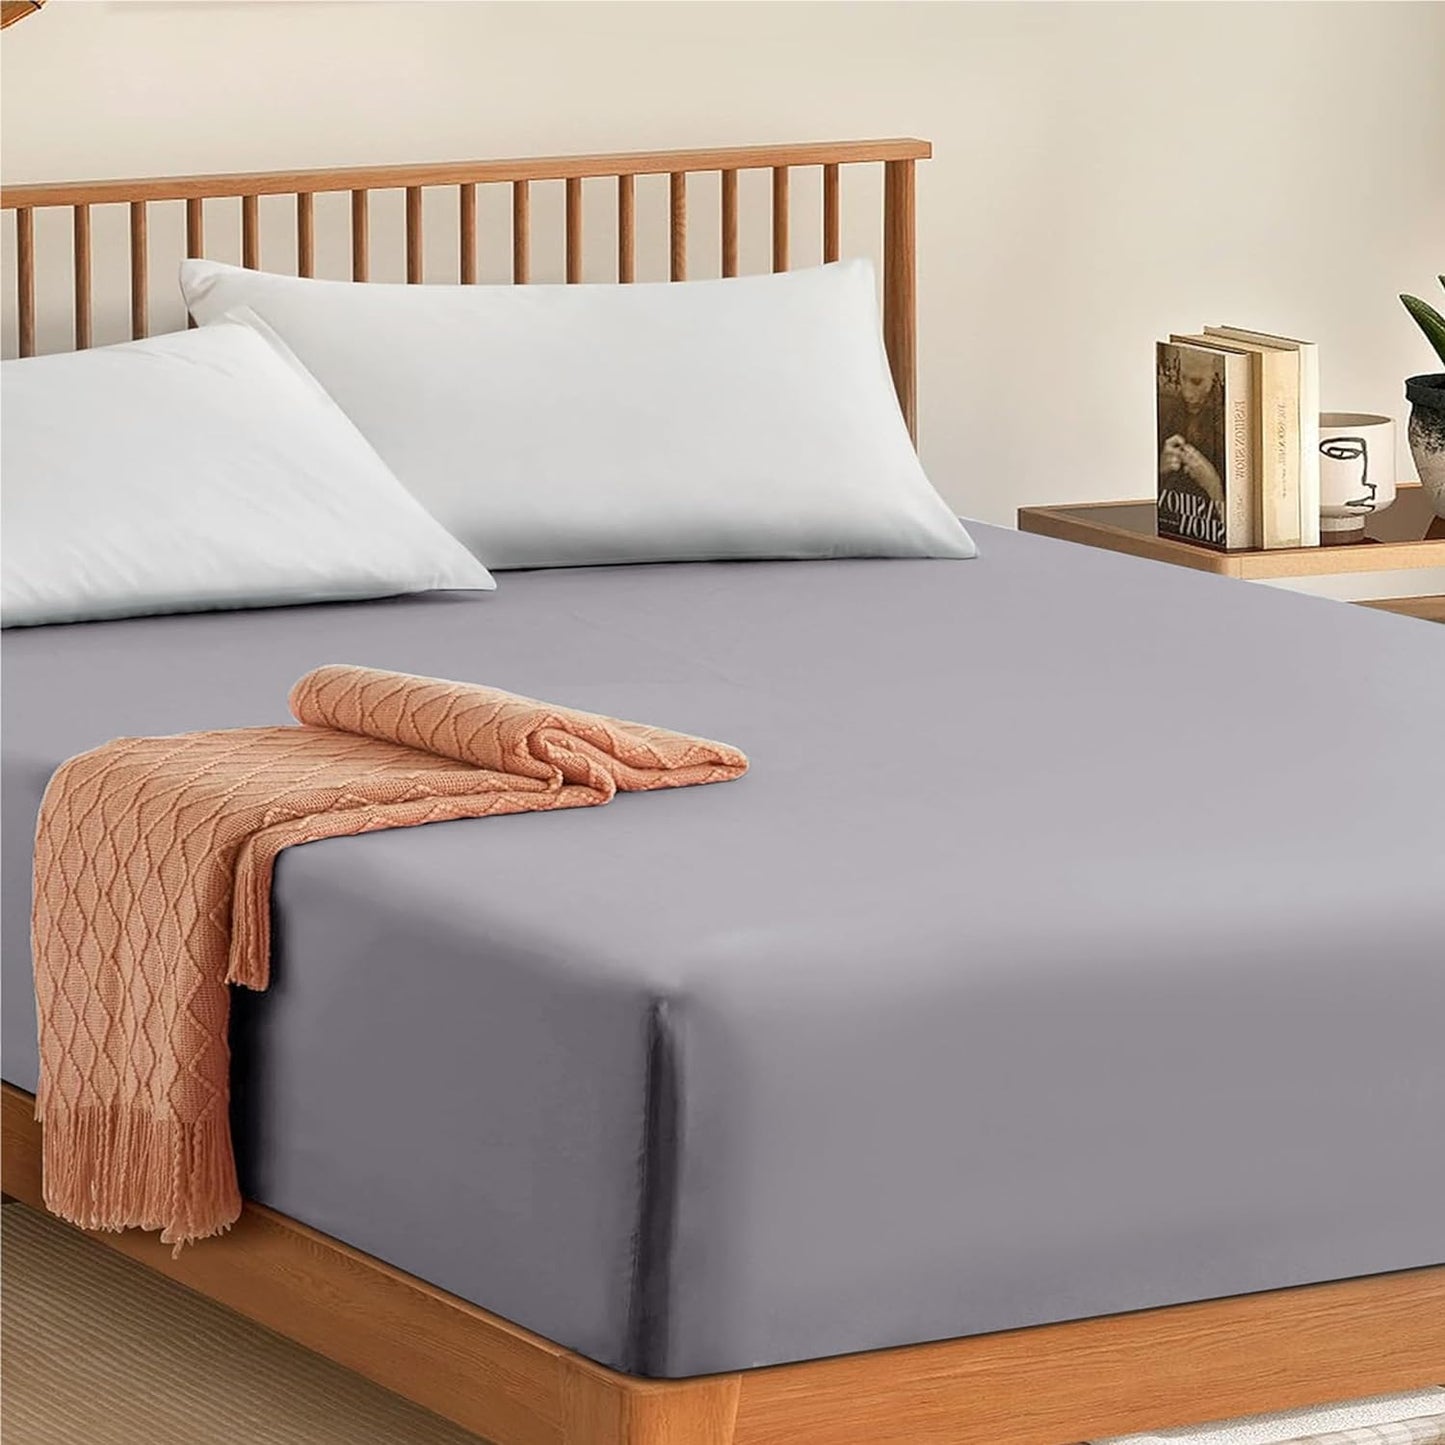 30cm Egyptian Cotton Fitted Sheet - 300 Thread Count Hotel Quality Bed Sheet